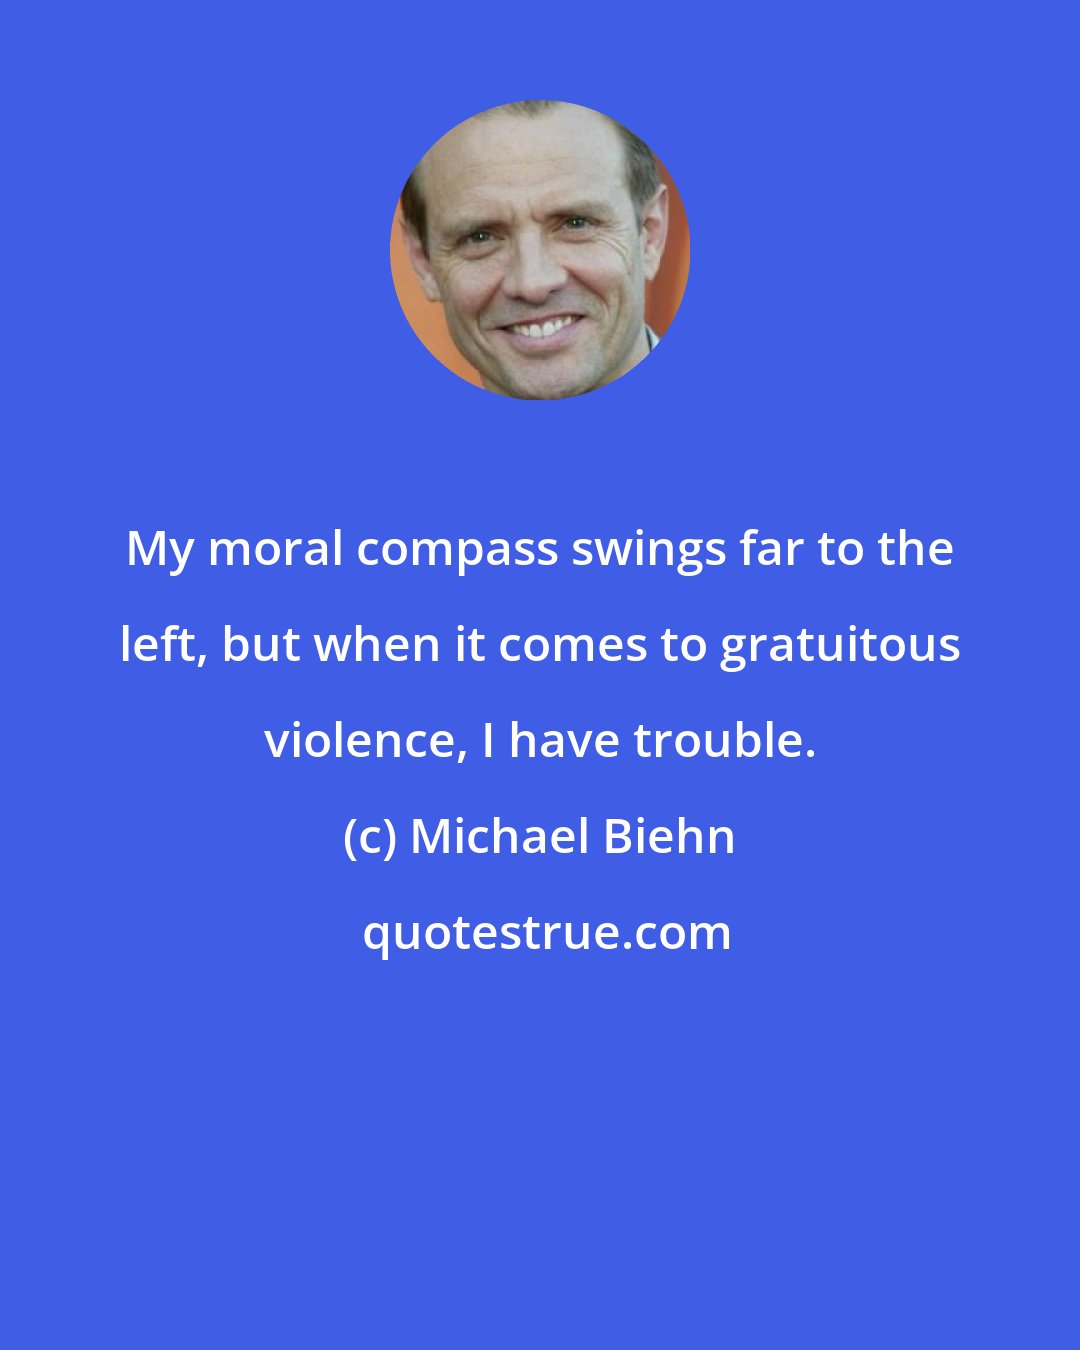 Michael Biehn: My moral compass swings far to the left, but when it comes to gratuitous violence, I have trouble.